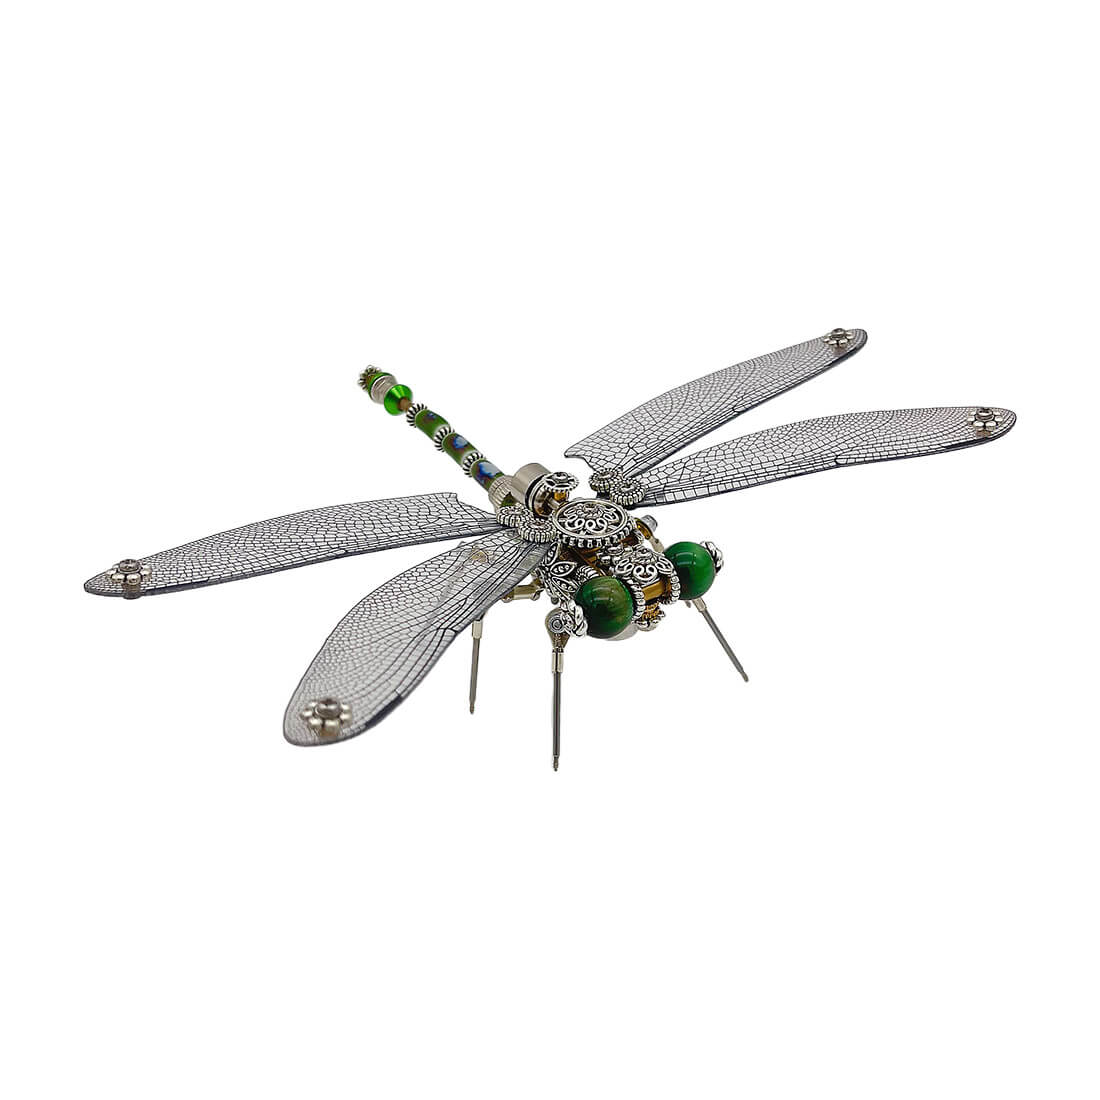 Steampunk Lesser Emperor Dragonfly 3D Mechanical Insect DIY Assembly Model (200+PCS)